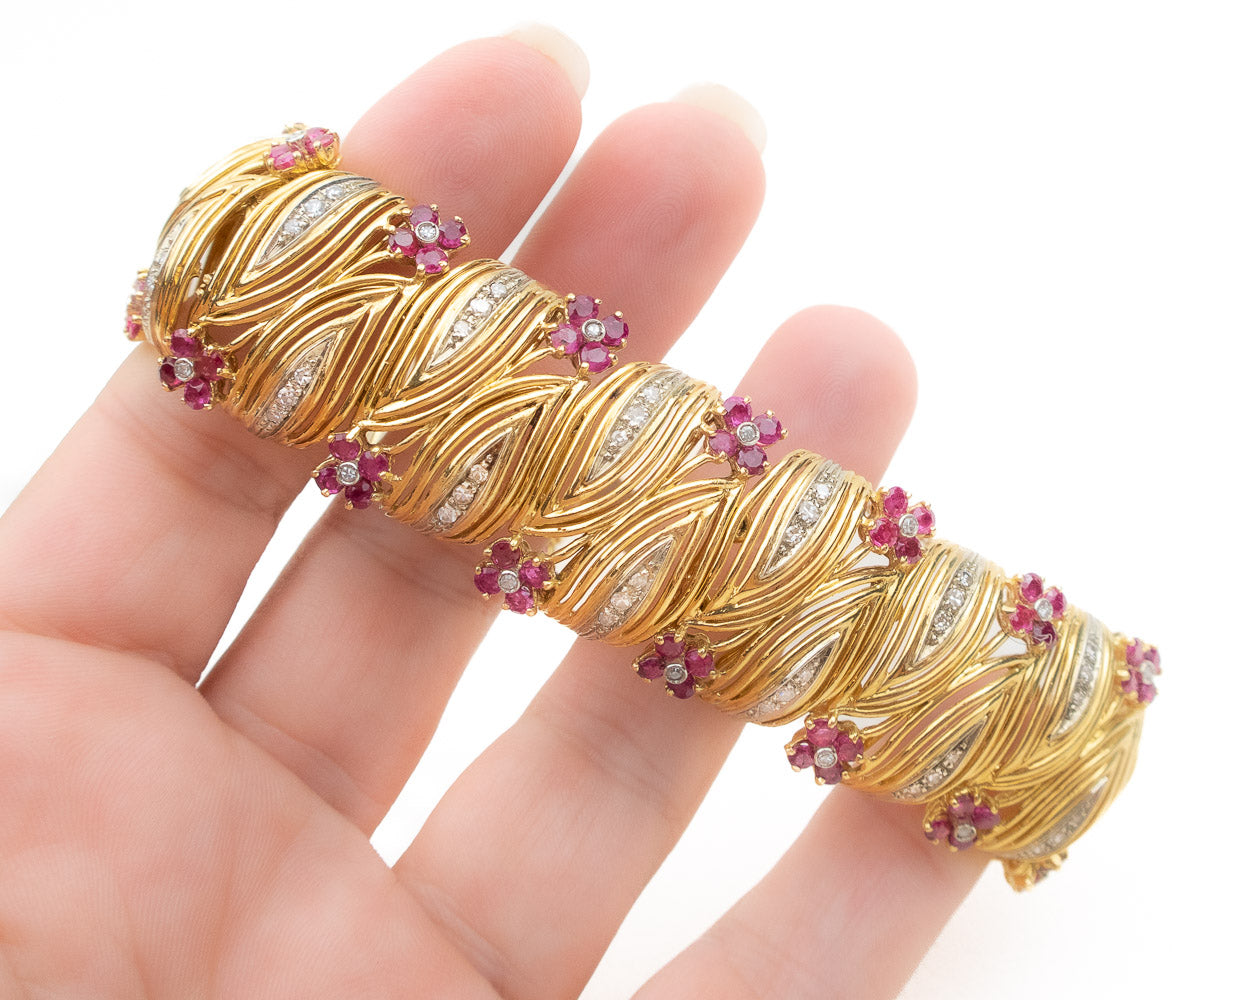 Burma No Heat Ruby Gold Bracelet with Early Victorian-Style Clasp